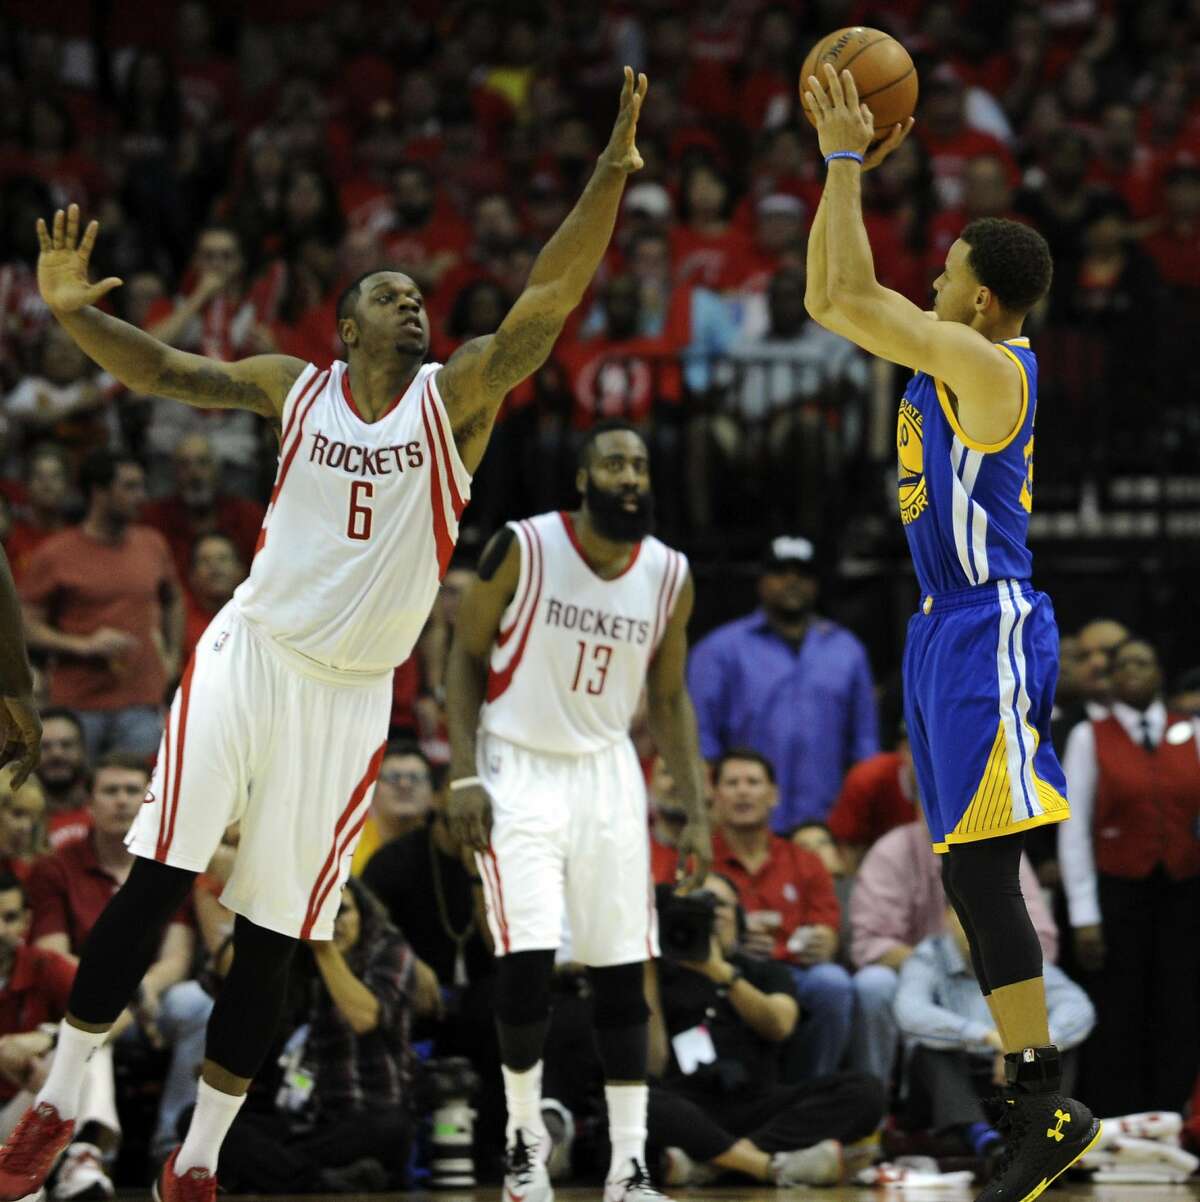 Golden State Warriors guard Stephen Curry #30 shots the ball as Houston Rockets forward Terrence Jones #6 defends in the third quarter of Game 4 of the Western Conference Finals, Monday, May 25, 2015, at Toyota Center in Houston, TX.